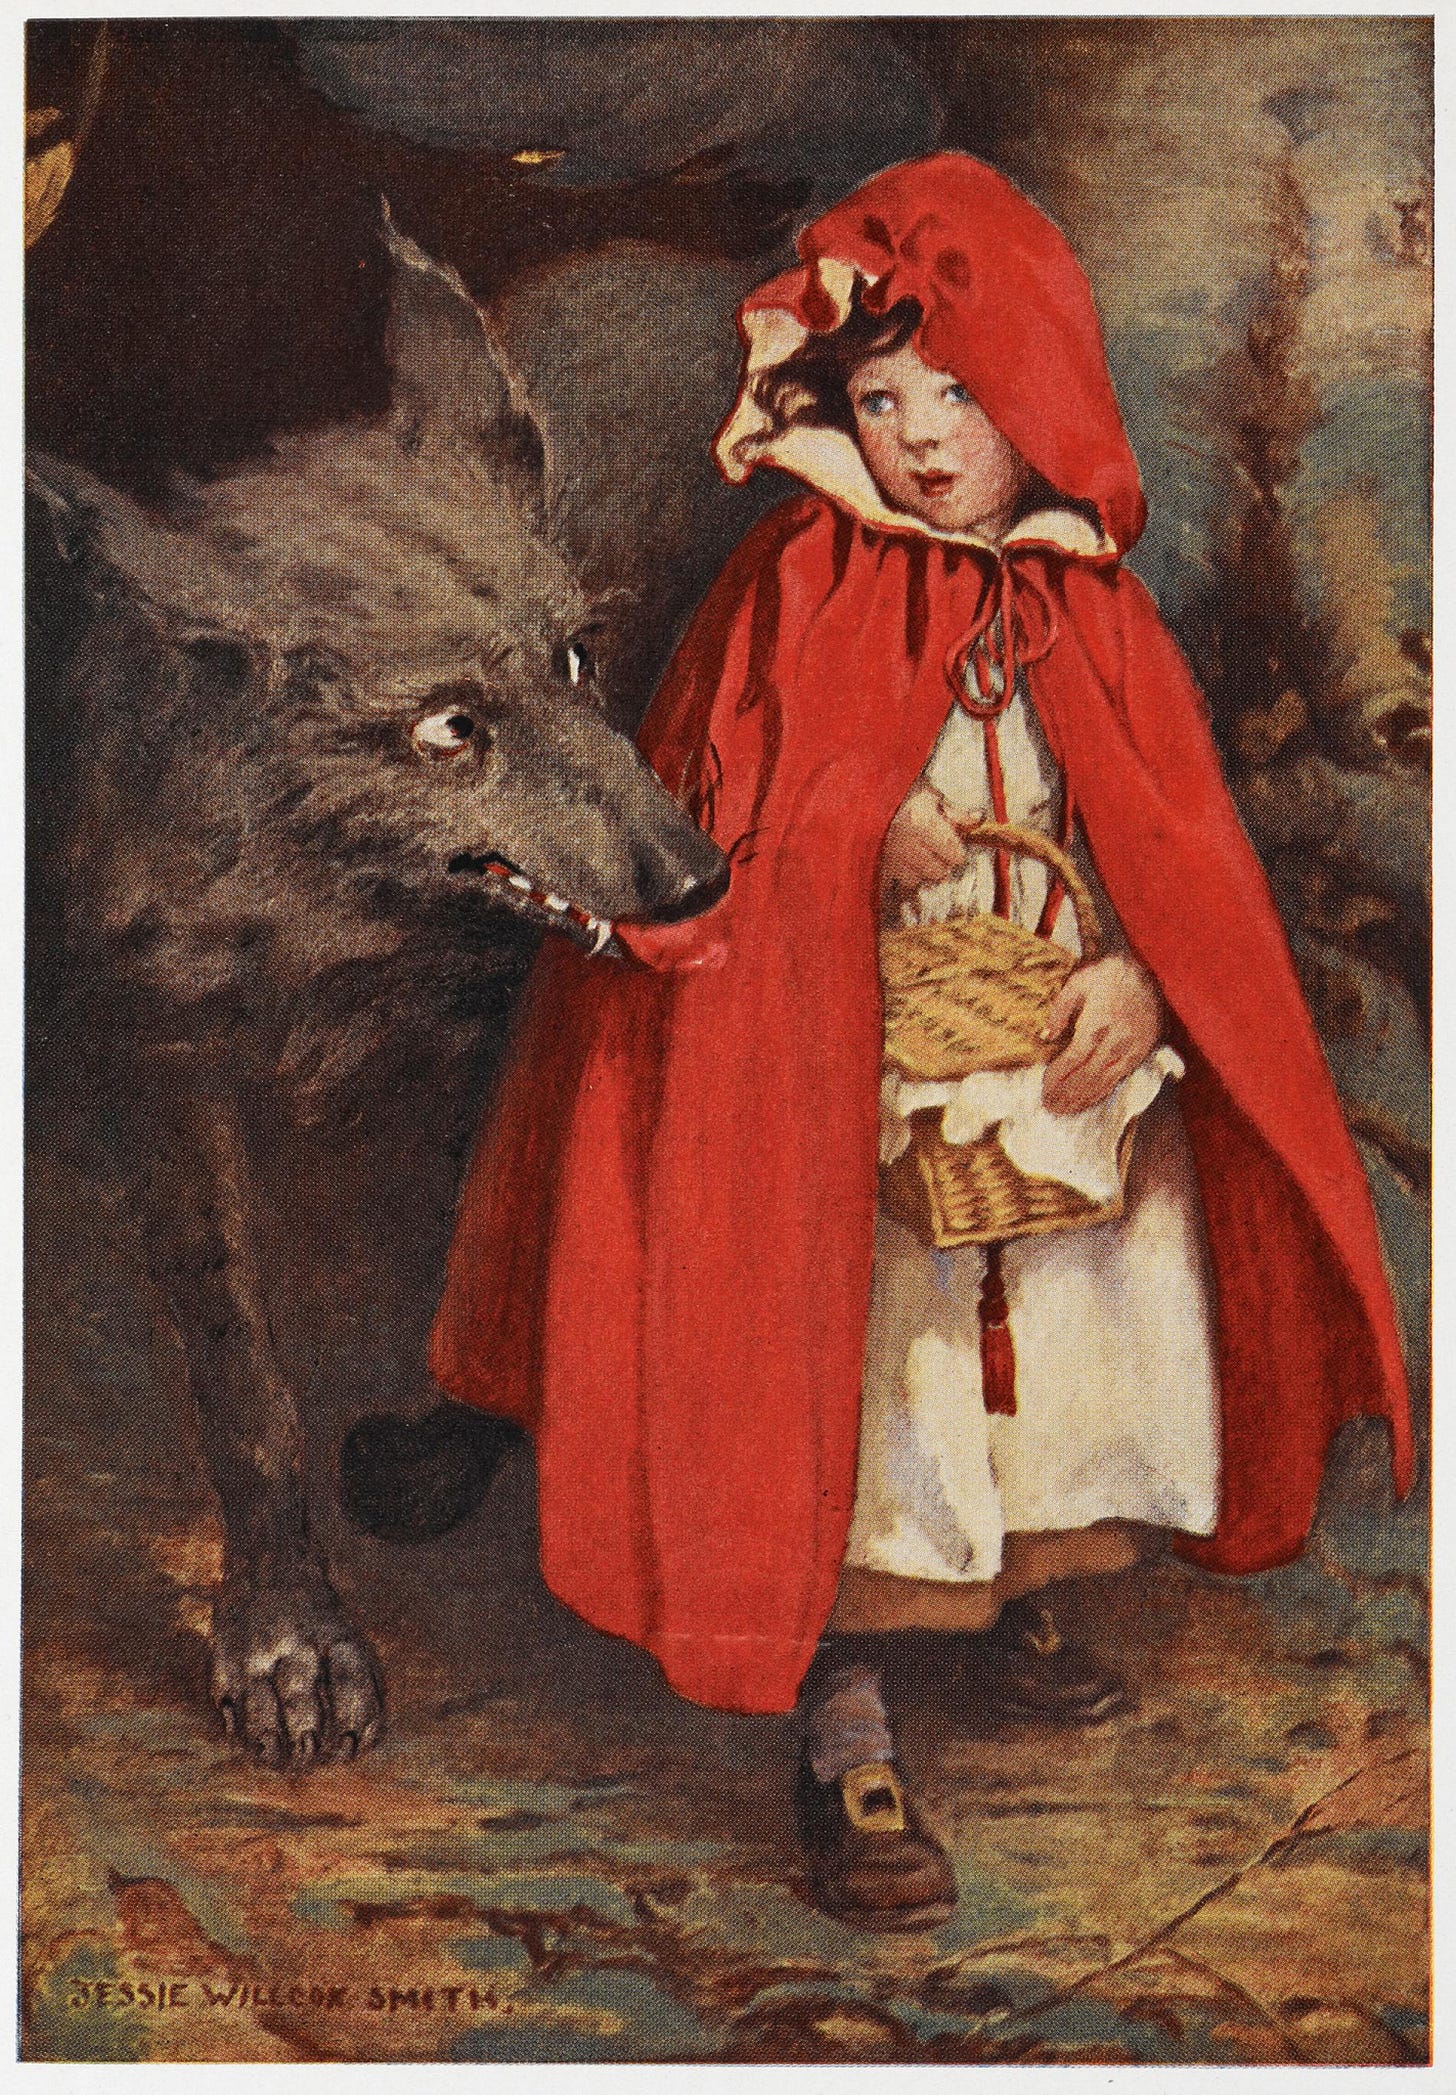 Little Red Riding Hood - Wikipedia